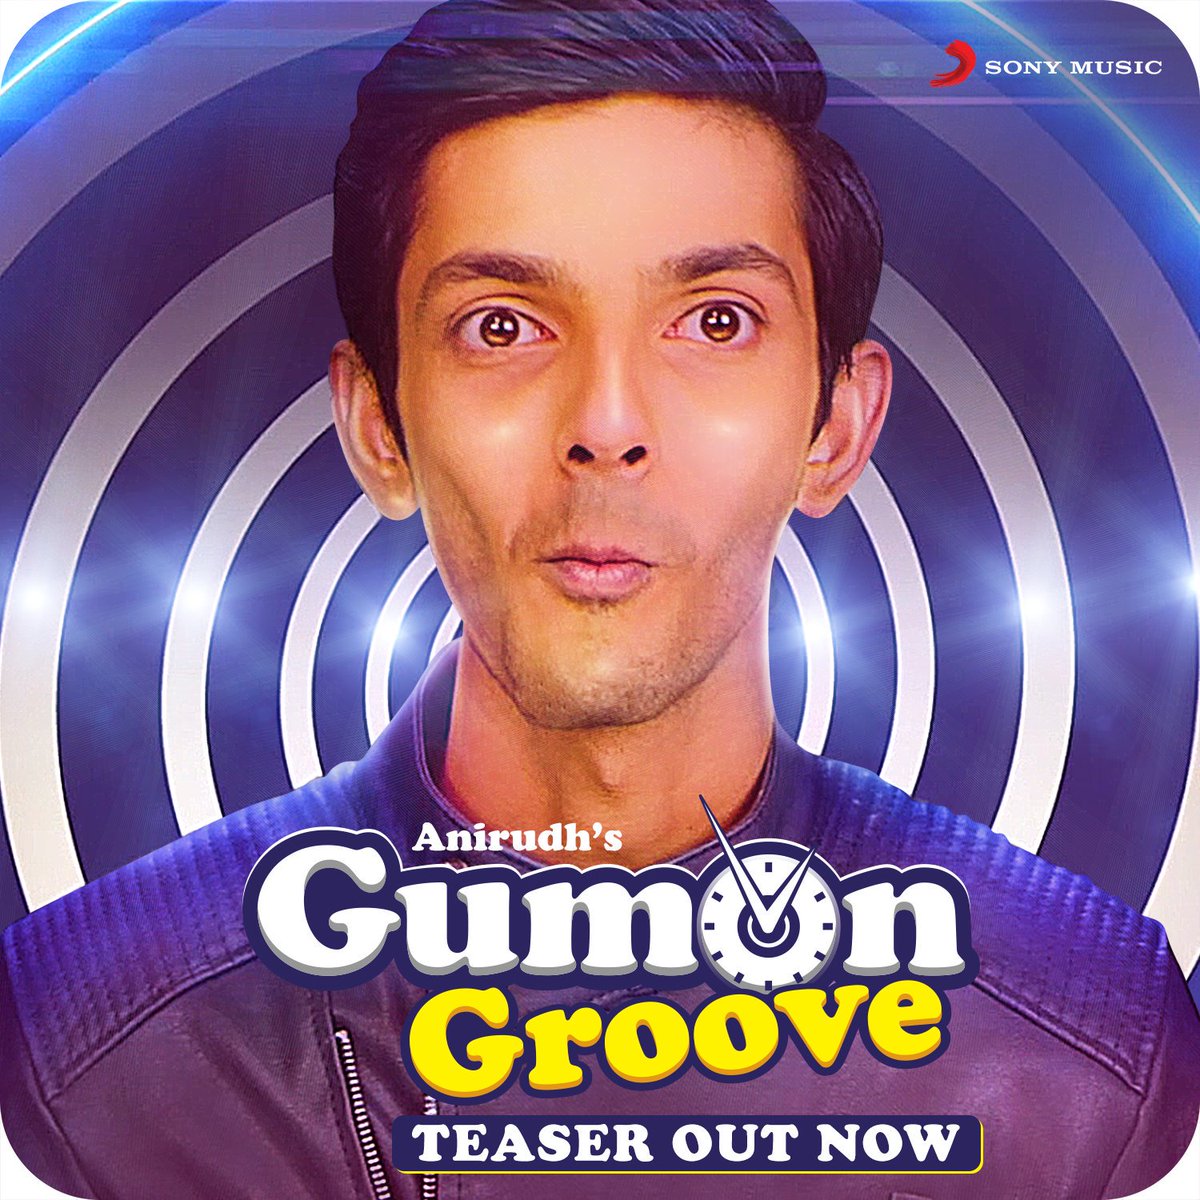 Grooviest song of 2018 is almost over 

Coming tomorrow: #GumOnGroove featuring @anirudhofficial 

➡️youtu.be/aFbnNEU3gNo

#NewYearGroove #GumOn 

@SonyMusicSouth